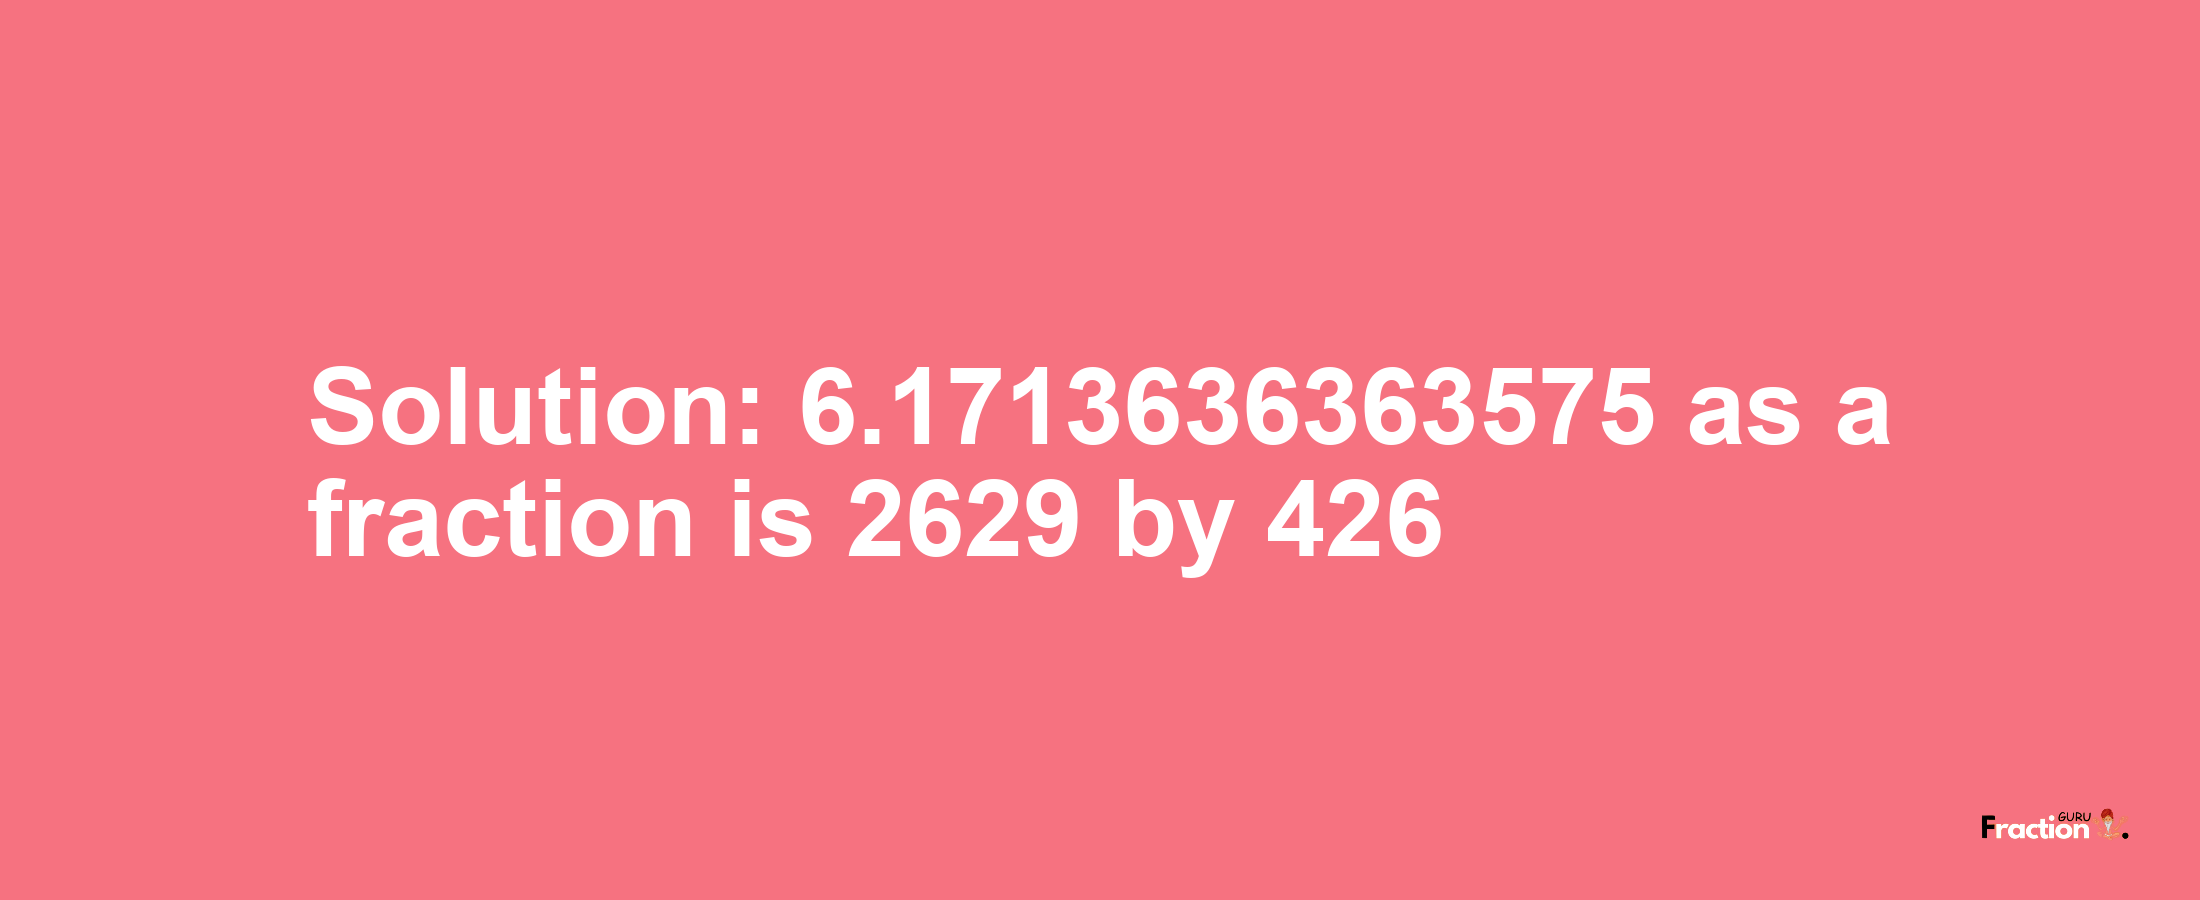 Solution:6.1713636363575 as a fraction is 2629/426